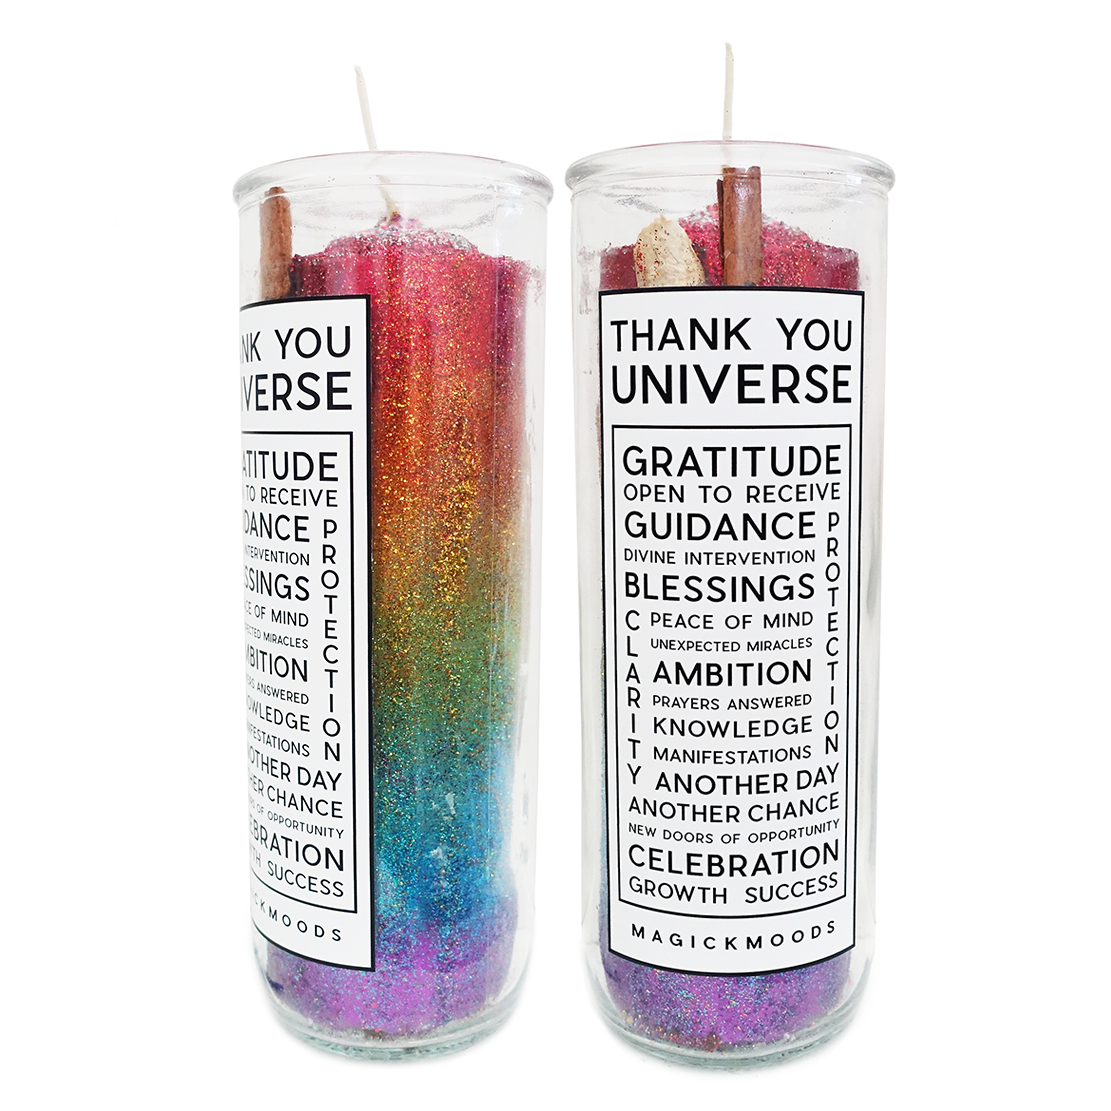 Thank You Universe 7-Day Meditation Candle - PREORDER - Ships by Nov 30th, 2023